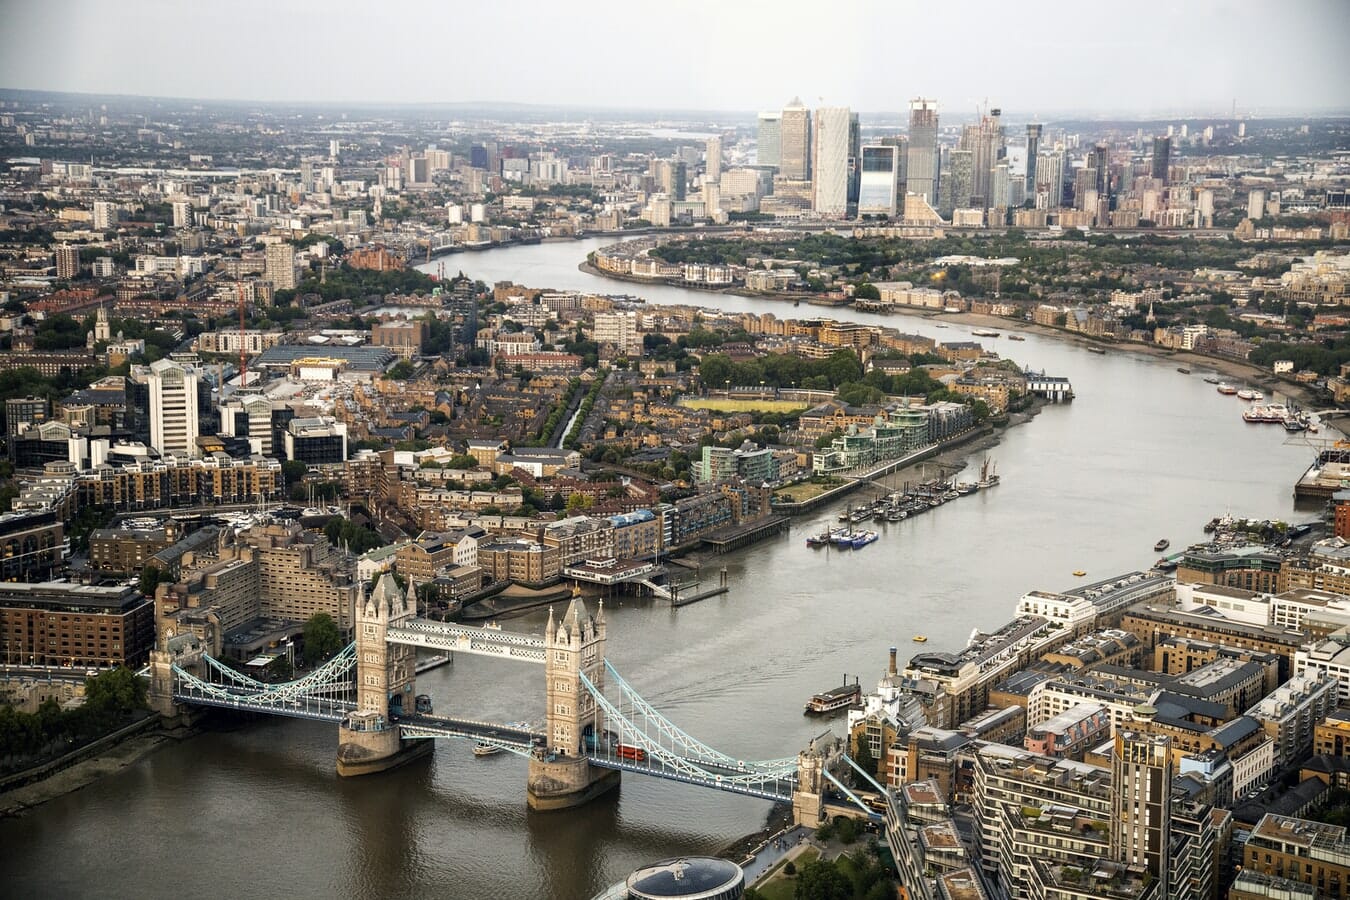 A view of the city of london from the tower bridge.